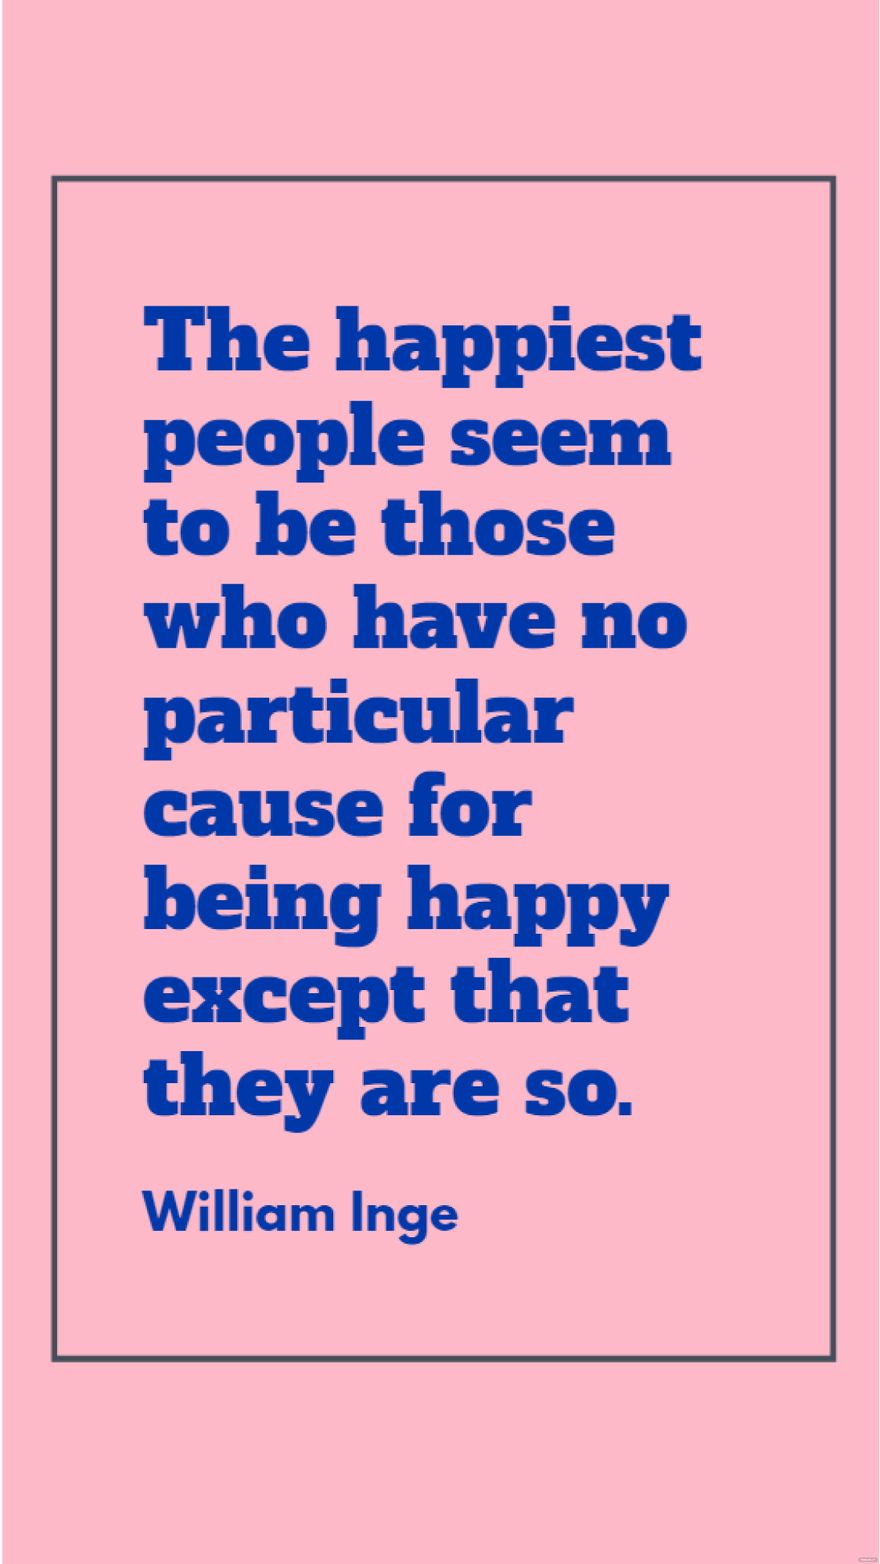 William Inge - The happiest people seem to be those who have no particular cause for being happy except that they are so.